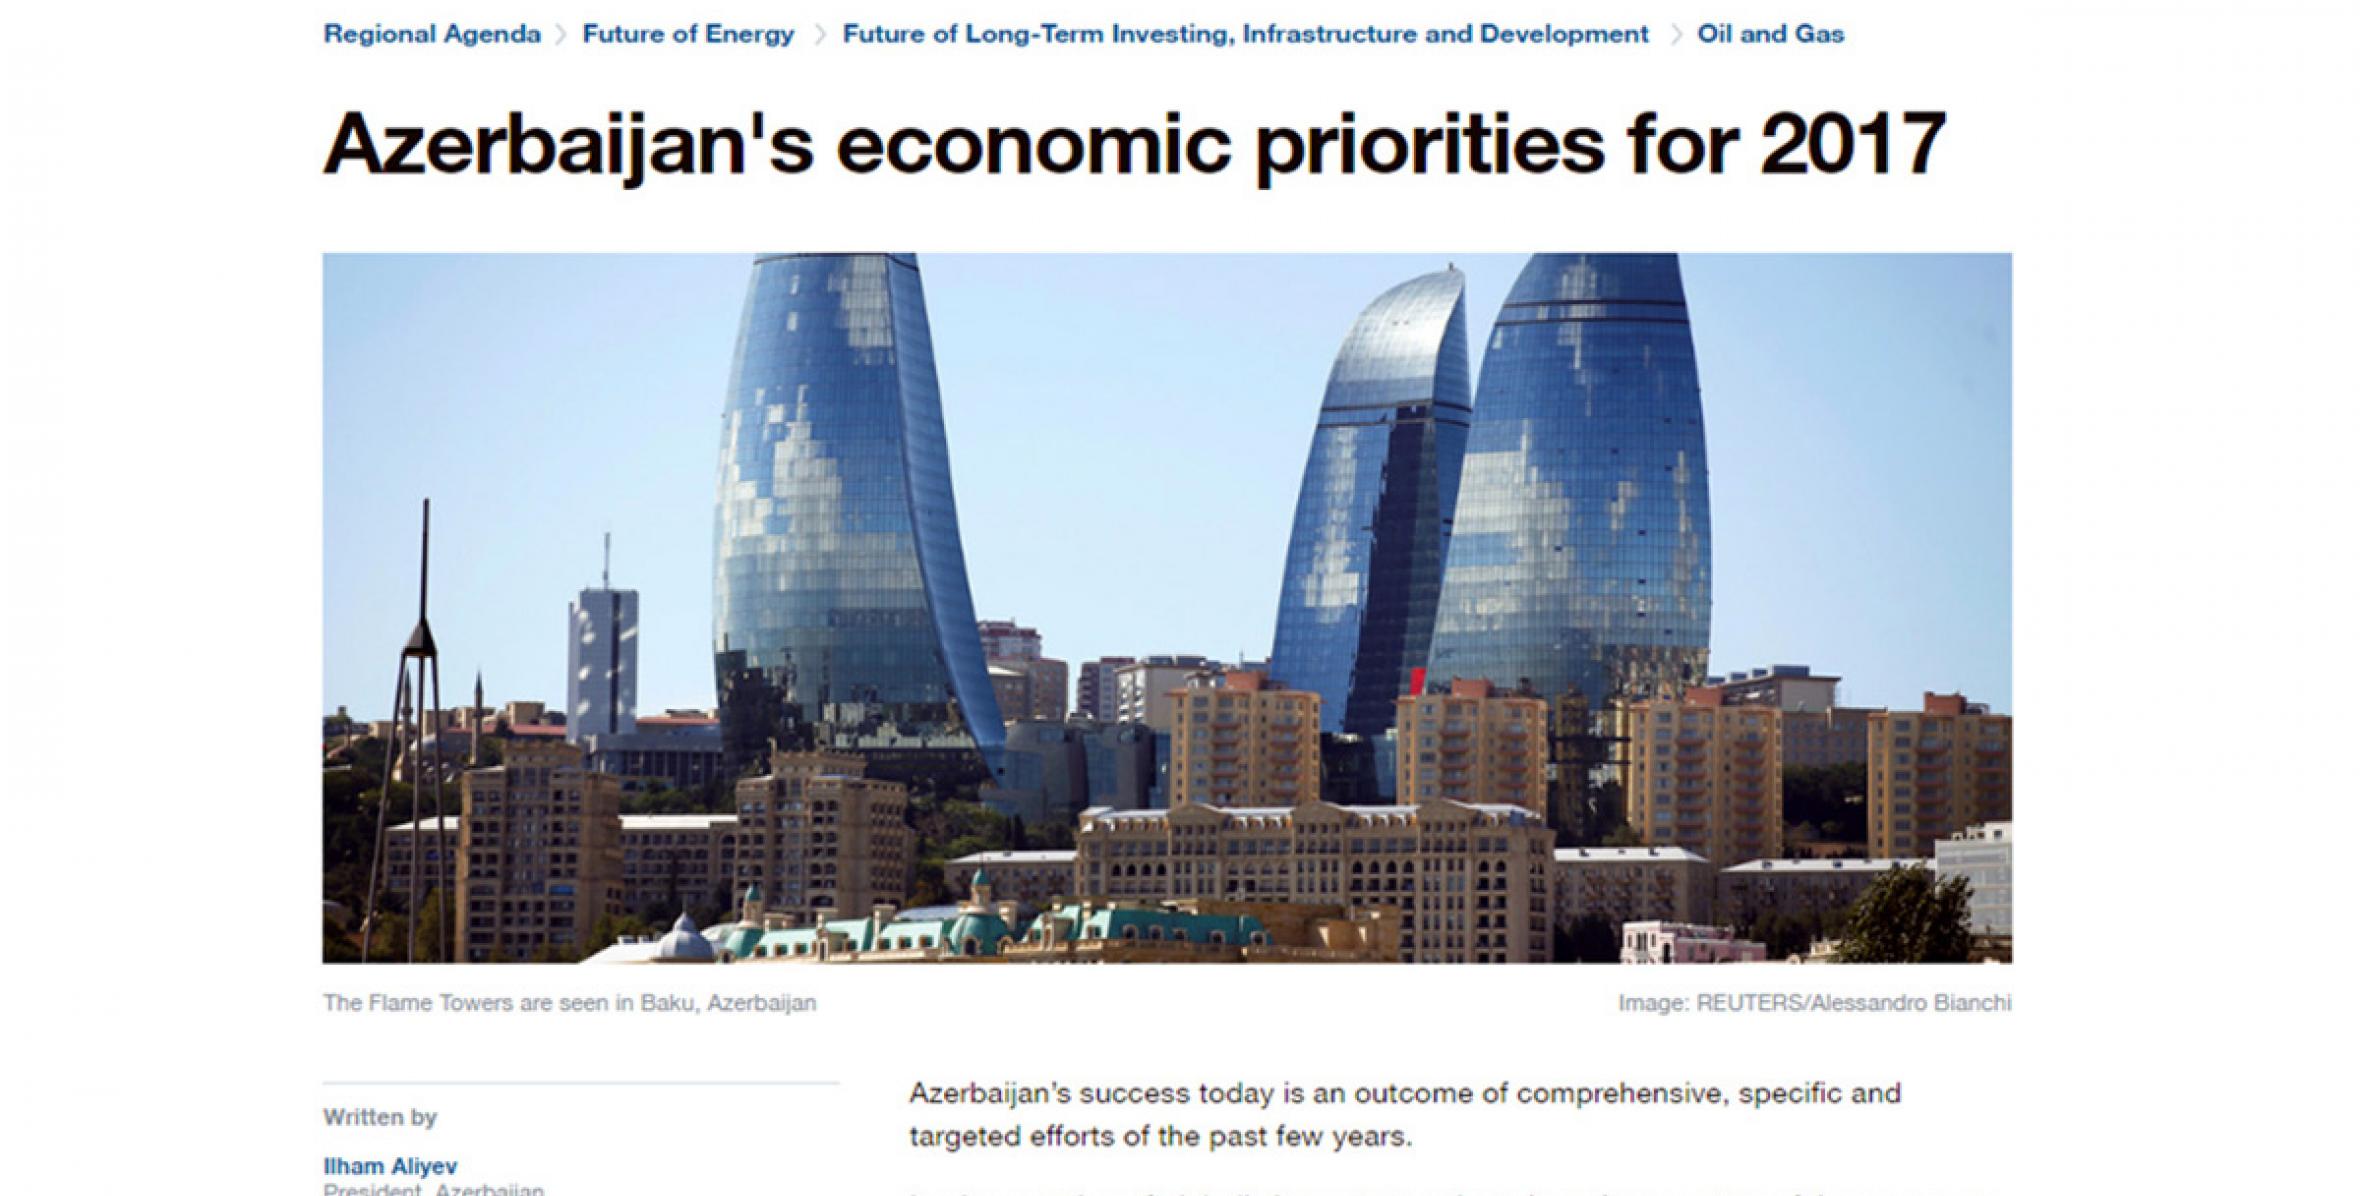 The official website of the World Economic Forum has published an article by Ilham Aliyev headlined "Azerbaijan's economic priorities for 2017"